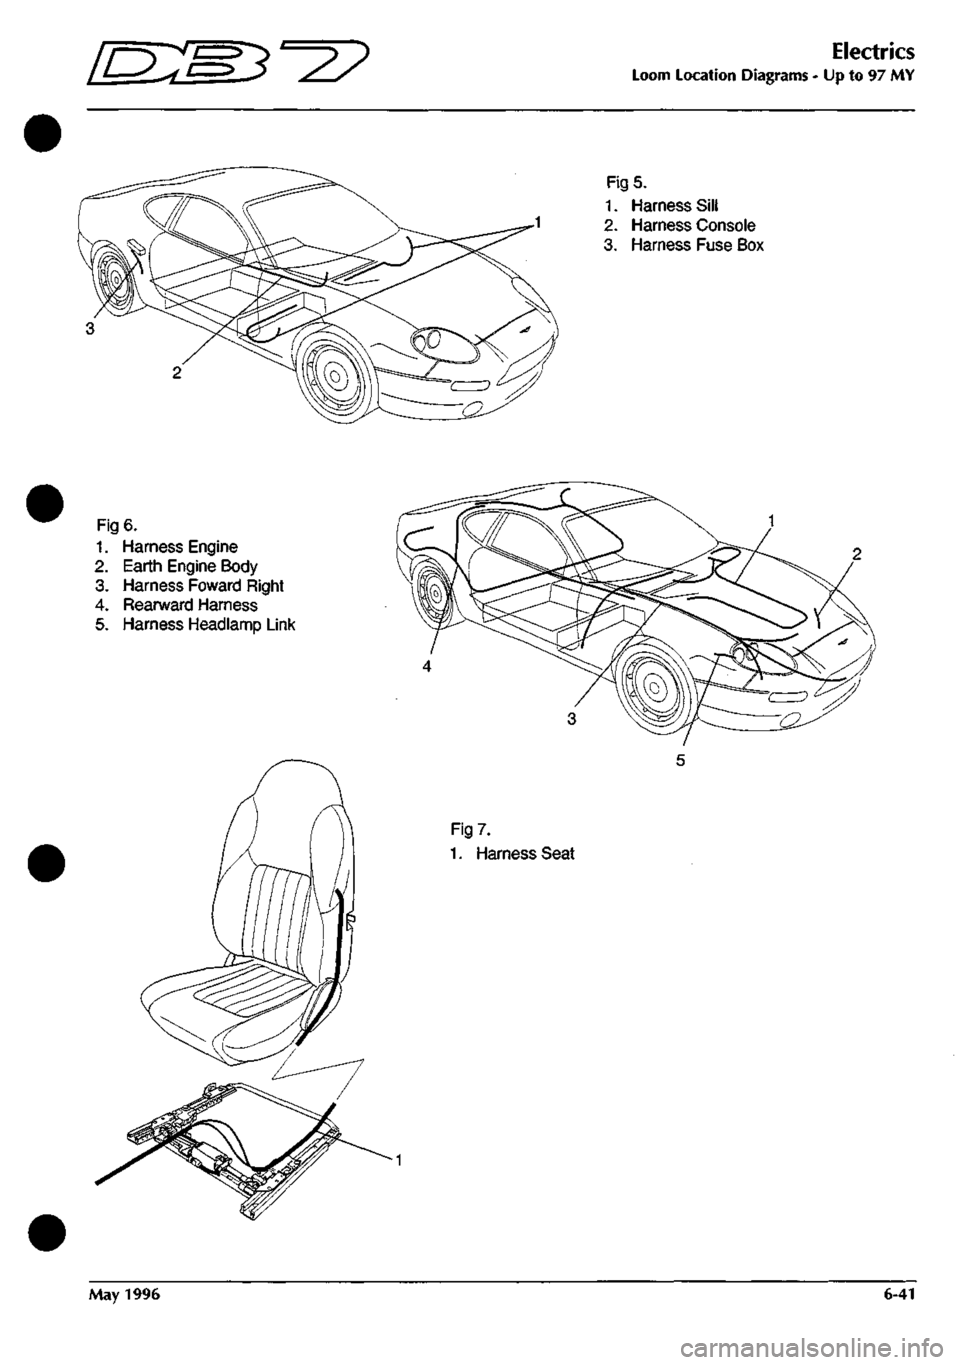 ASTON MARTIN DB7 1997 Service Manual 
Electrics 
Loom Location Diagrams - Up to 97 MY 
Fig 5. 

1.
 Harness Sill 

2.
 Harness Console 
3. Harness Fuse Box 
Fig 6. 

1.
 Harness Engine 

2.
 Earth Engine Body 
3. Harness Foward Right 

4